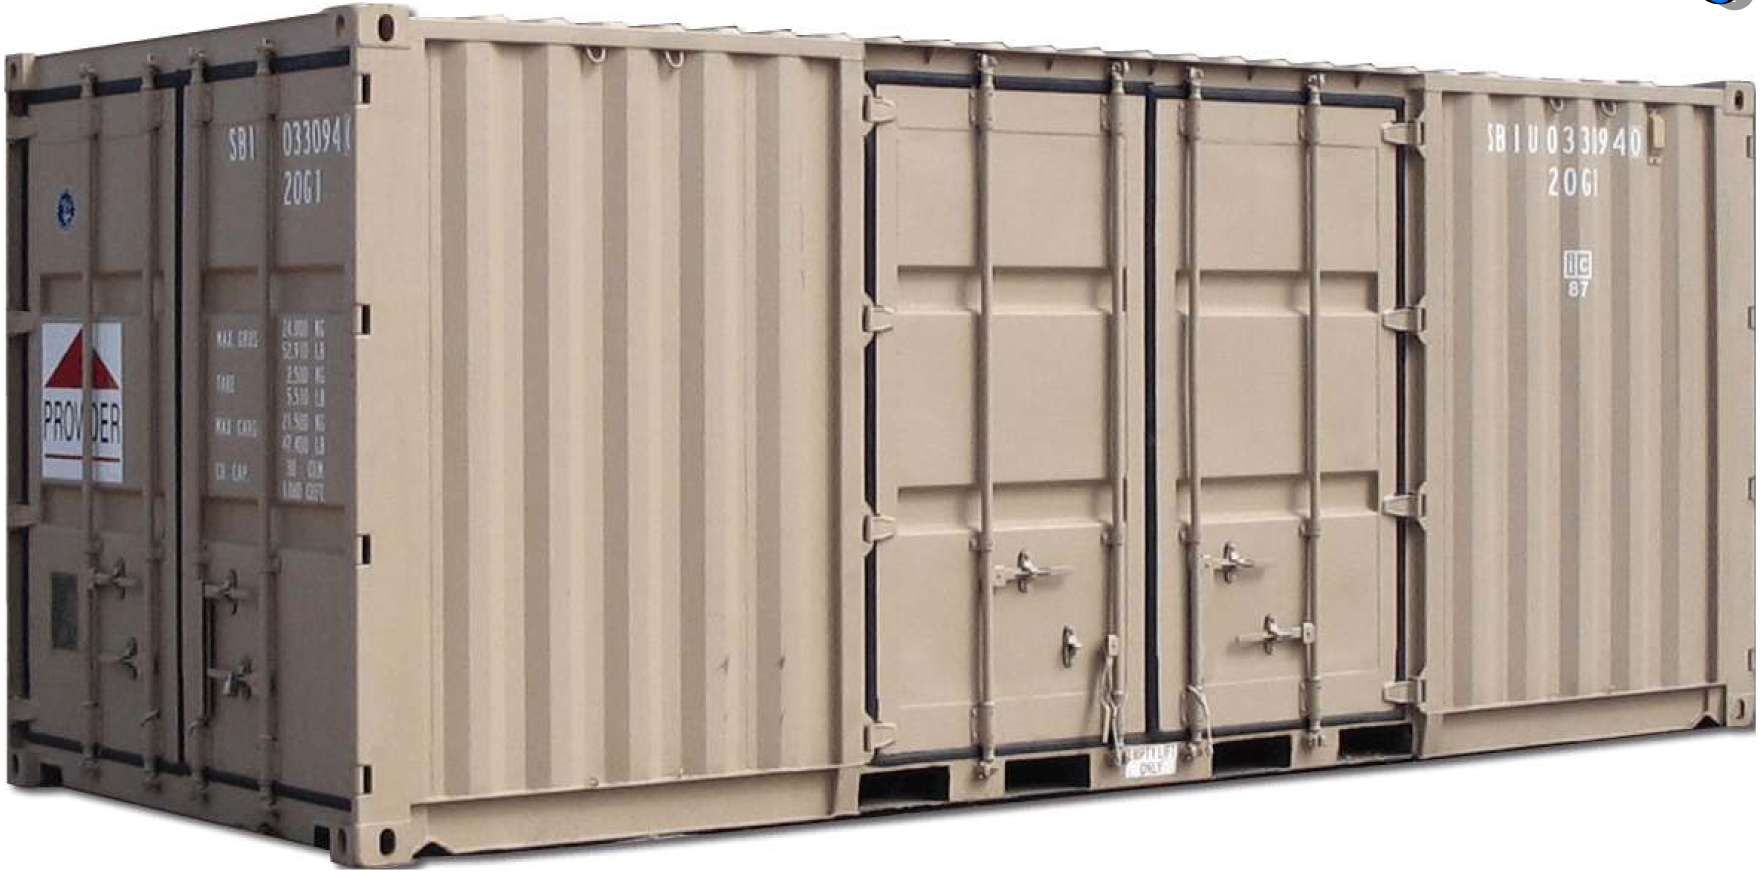 20’ x 8’ ISO Dry Freight Container Double Doors on Both Ends & One Side with Electric & Lighting